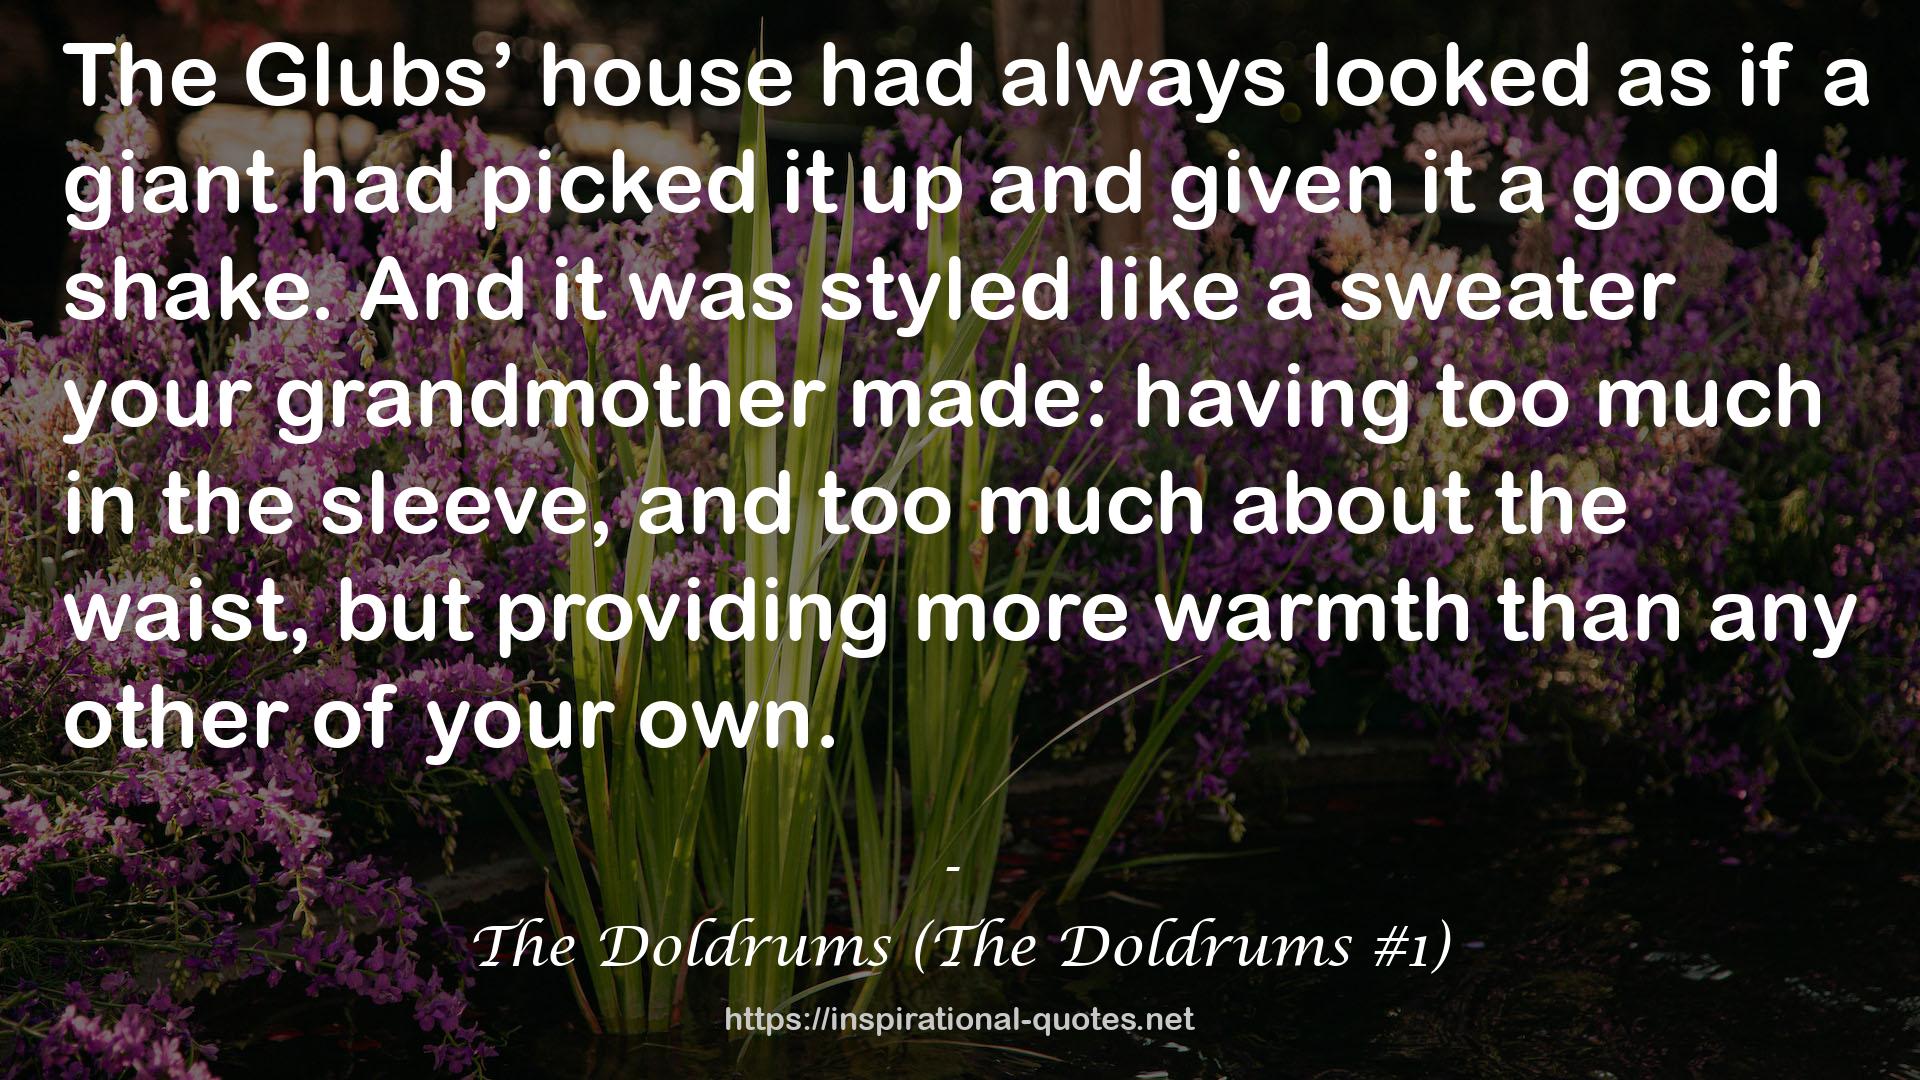 The Doldrums (The Doldrums #1) QUOTES